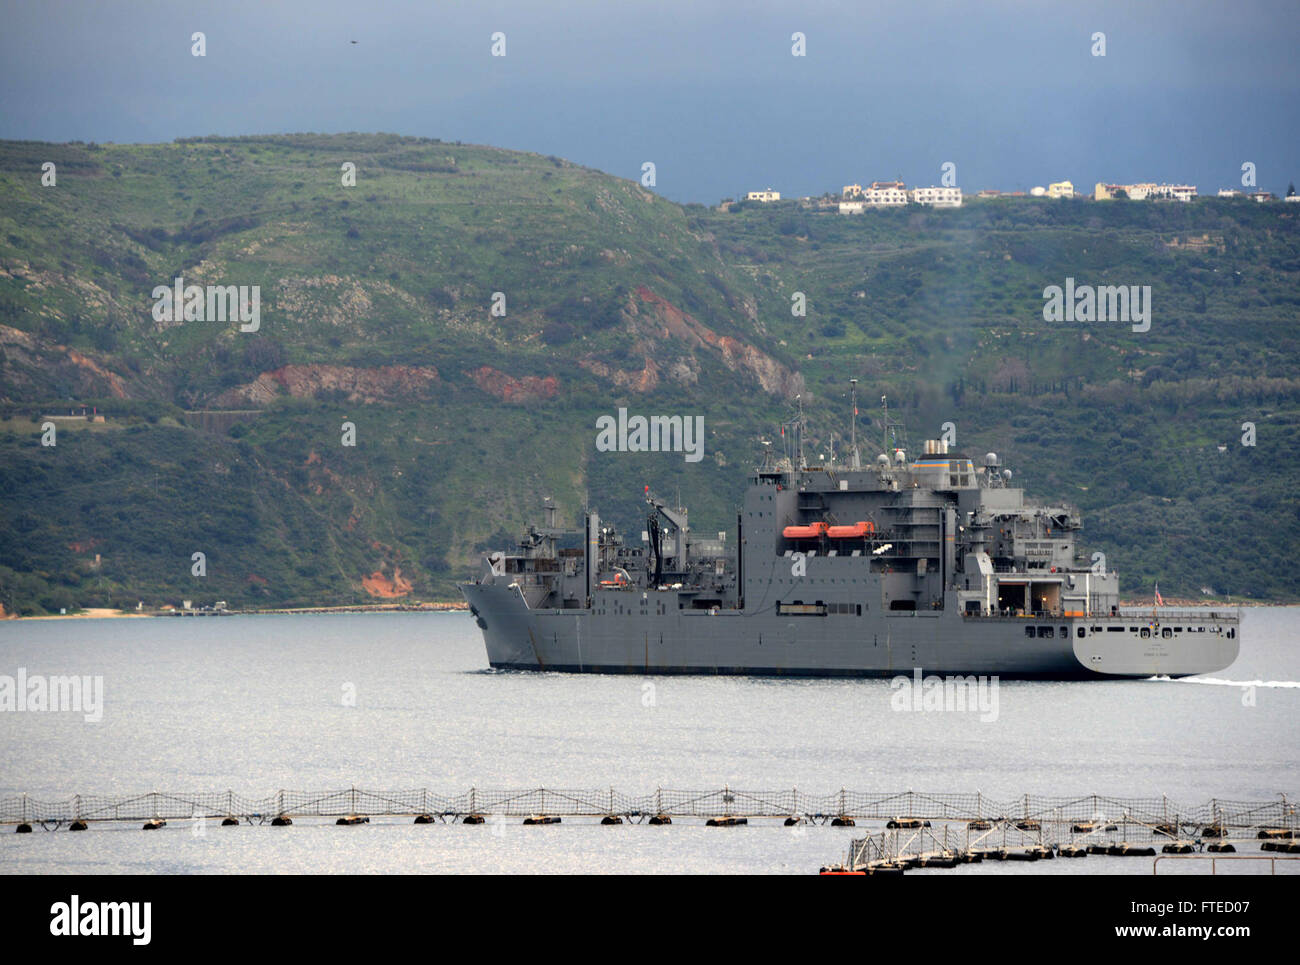 SOUDA BAY, Greece (Mar. 10, 2014) – The Military Sealift Command USNS Robert E. Peary (T-AKE-5) departs Souda Bay after a scheduled port visit. Peary, a Lewis and Clark-Class dry cargo ship able to transport over 6,000 tons of dry cargo and provide helicopter air support, is manned by a compliment of military and Civil Service Mariners. Stock Photo